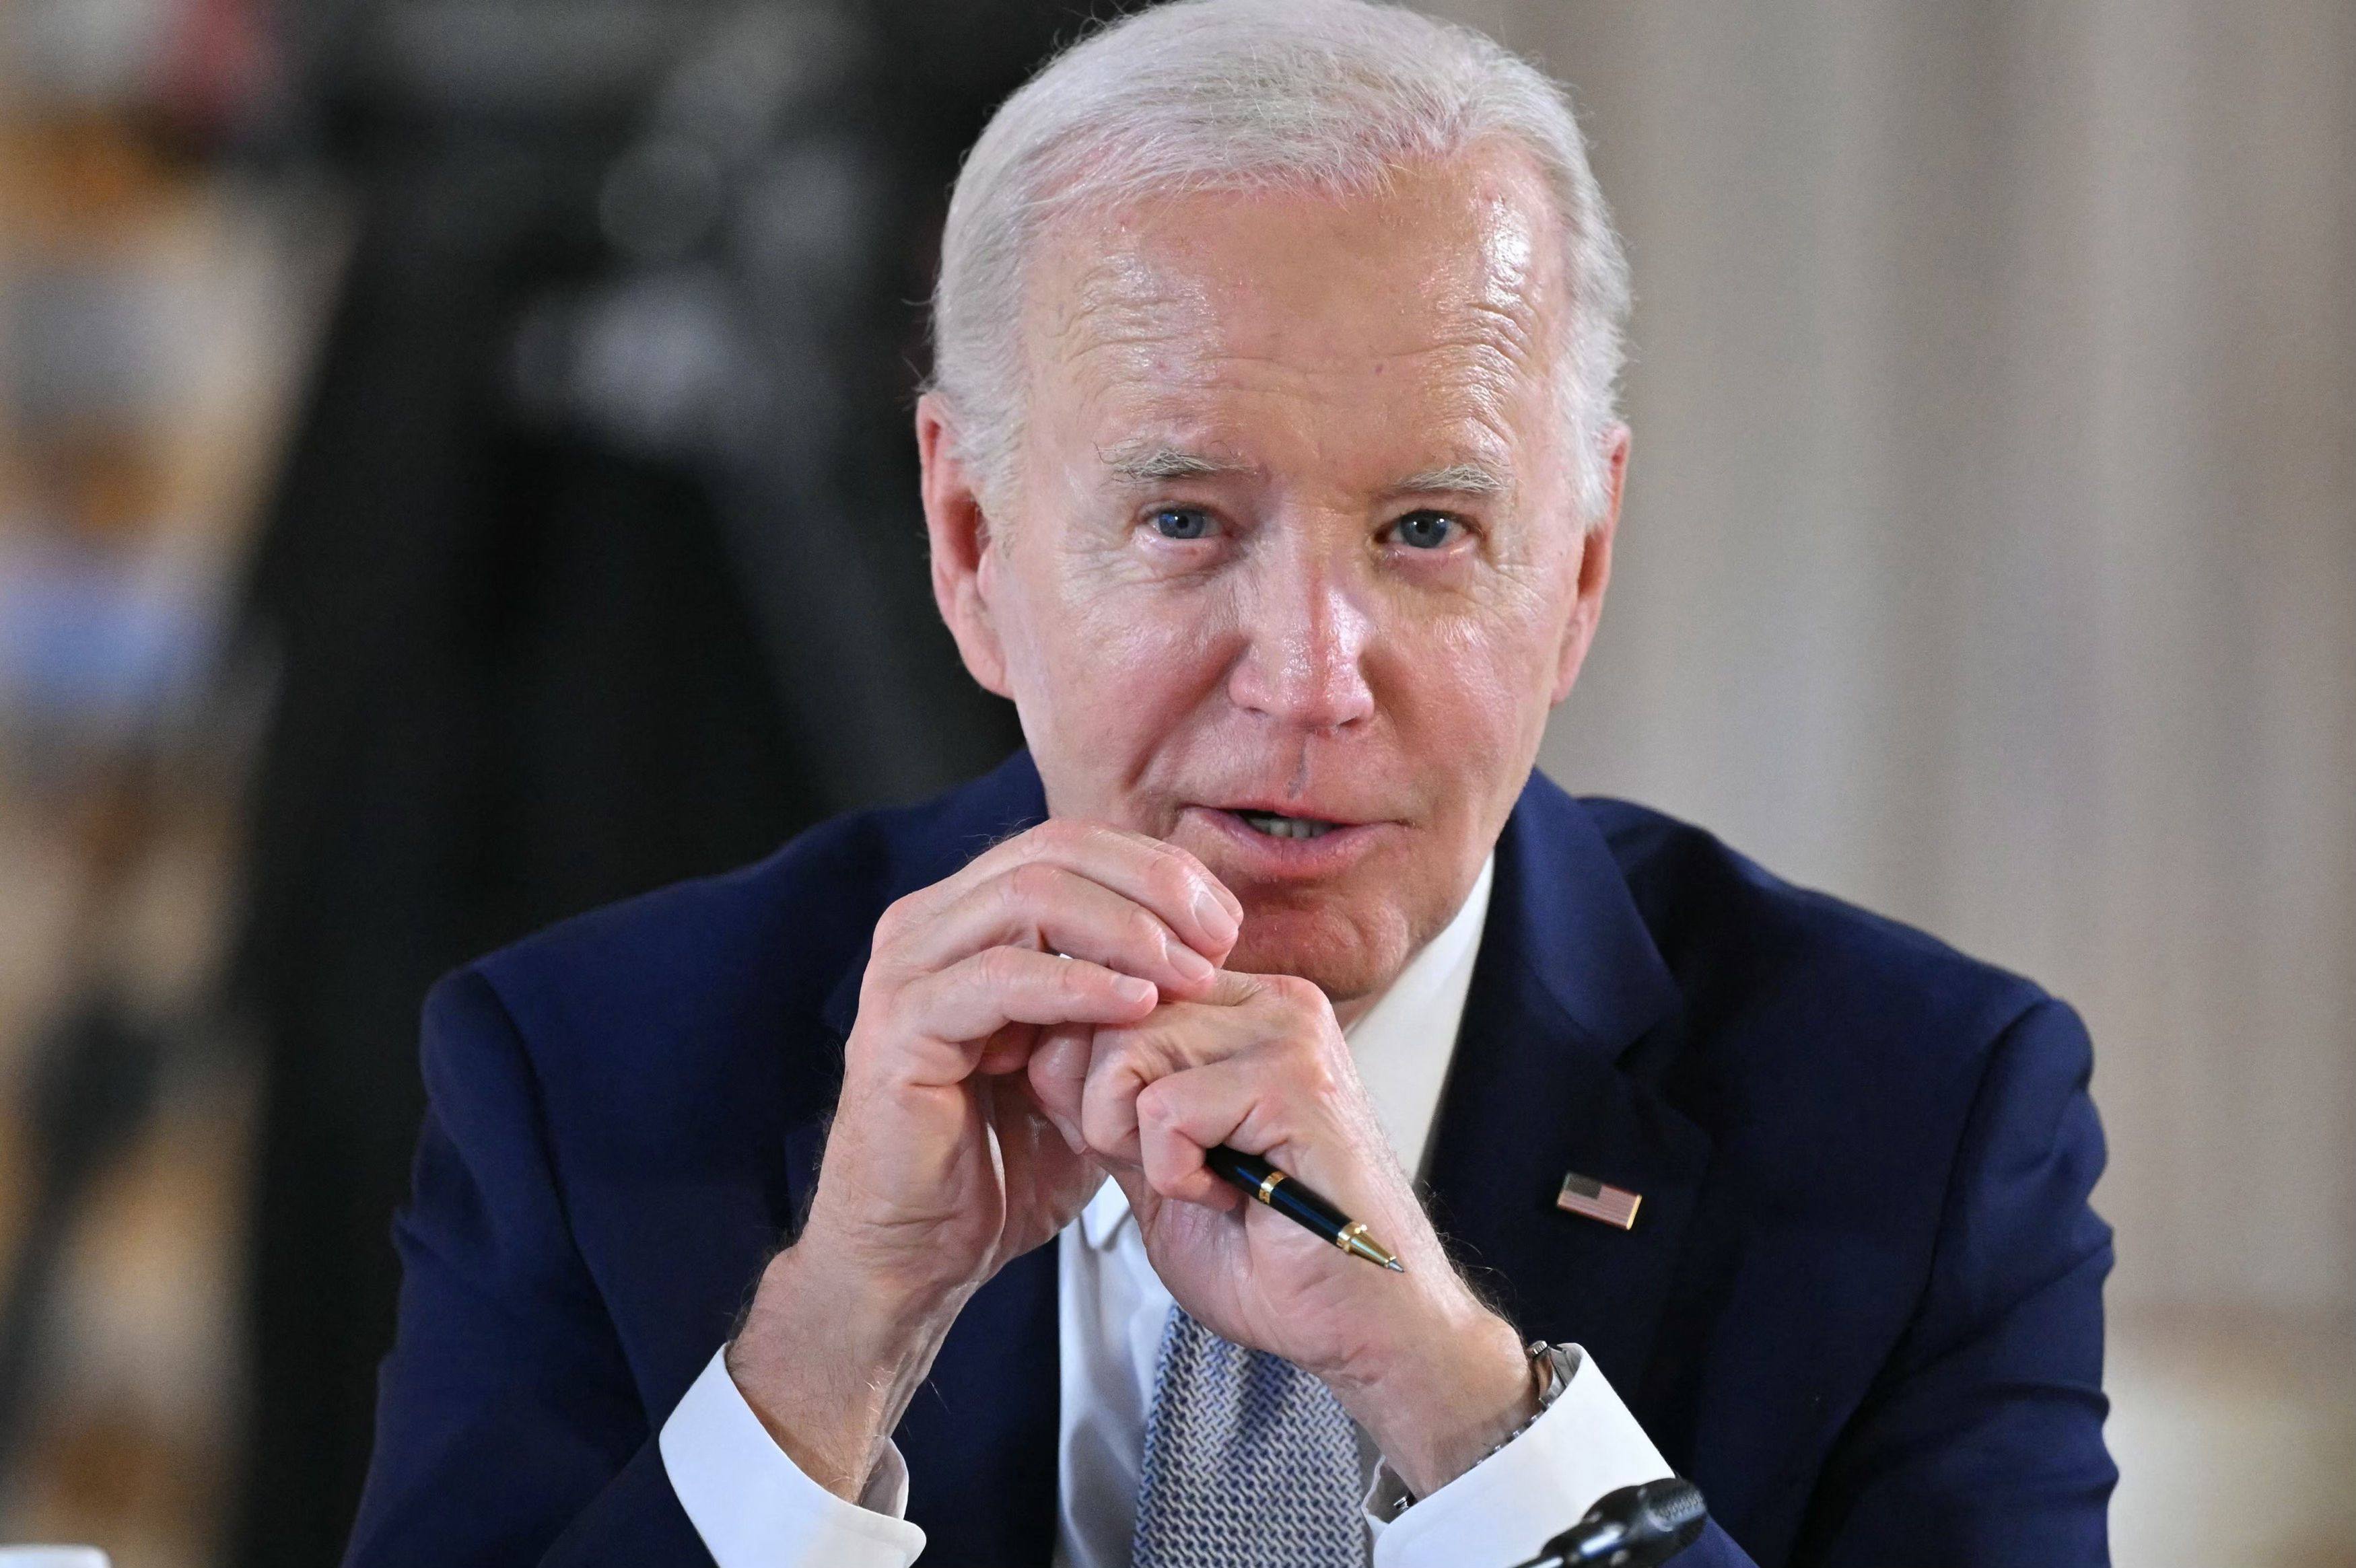 US President Joe Biden in Italy for the G7 summit on Thursday. Efforts to halt Russia’s war against Ukraine are top of mind at the meeting. Photo: AFP